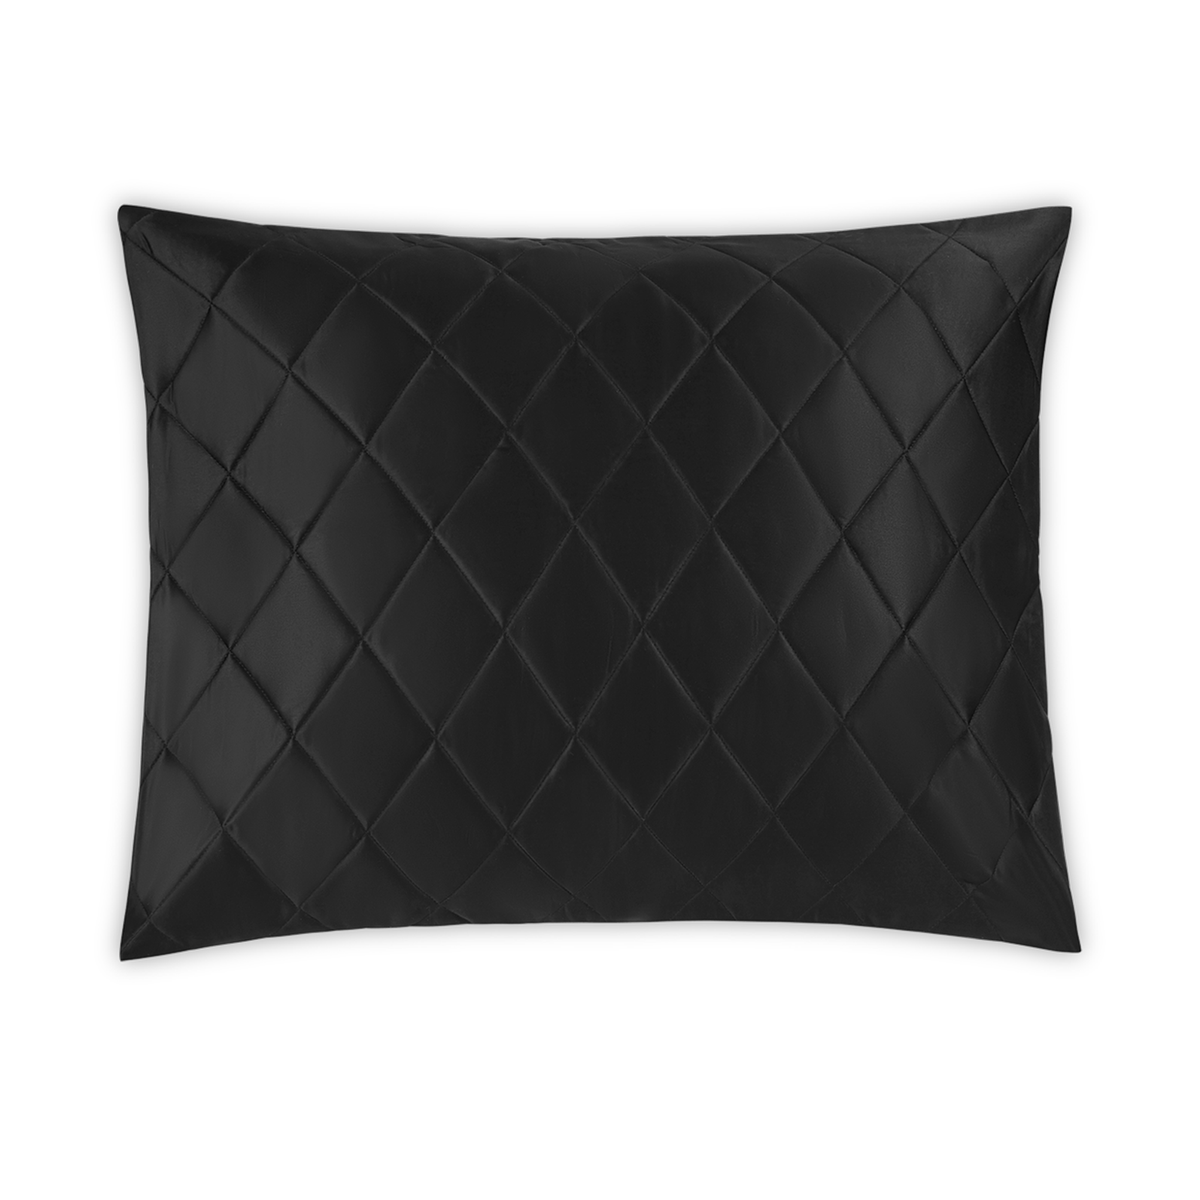 Silo Image of Matouk Nocturne Quilted Bedding Sham in Black Color